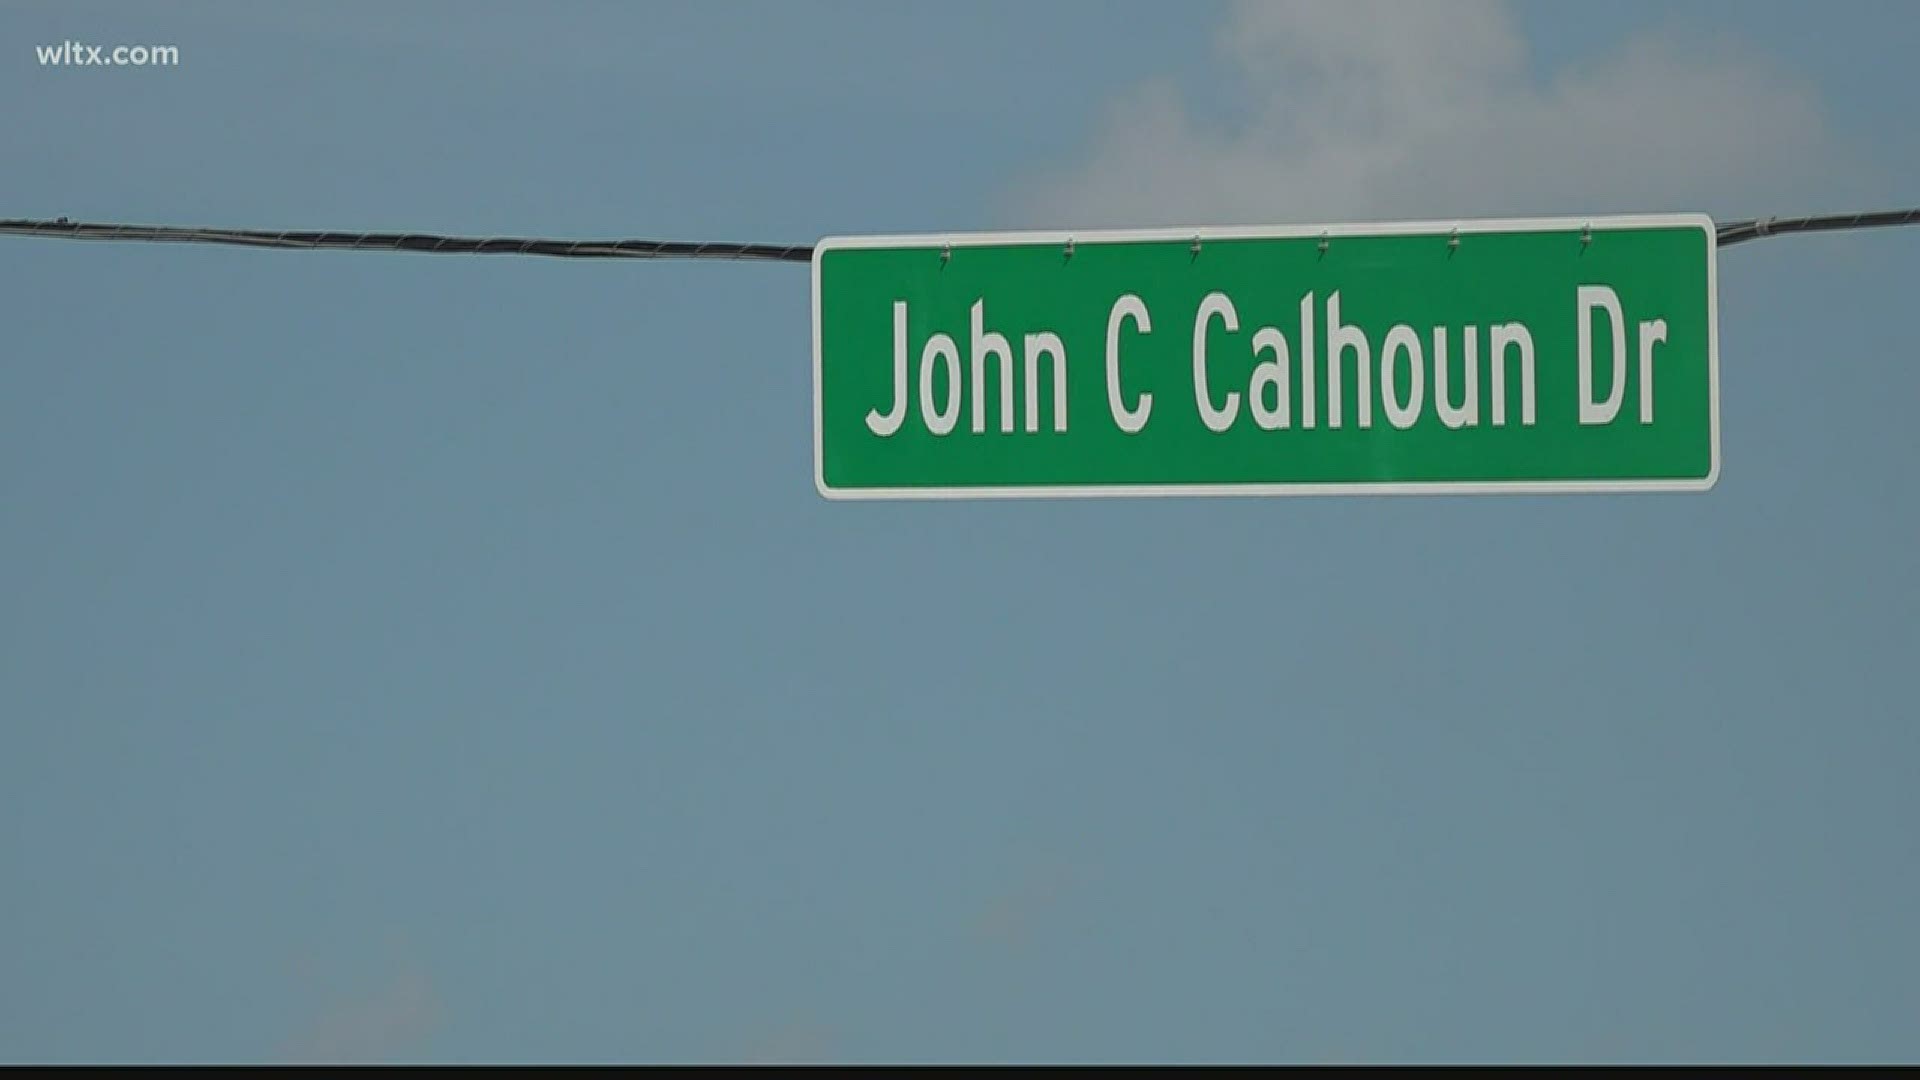 The Orangeburg city council voted to rename the street.